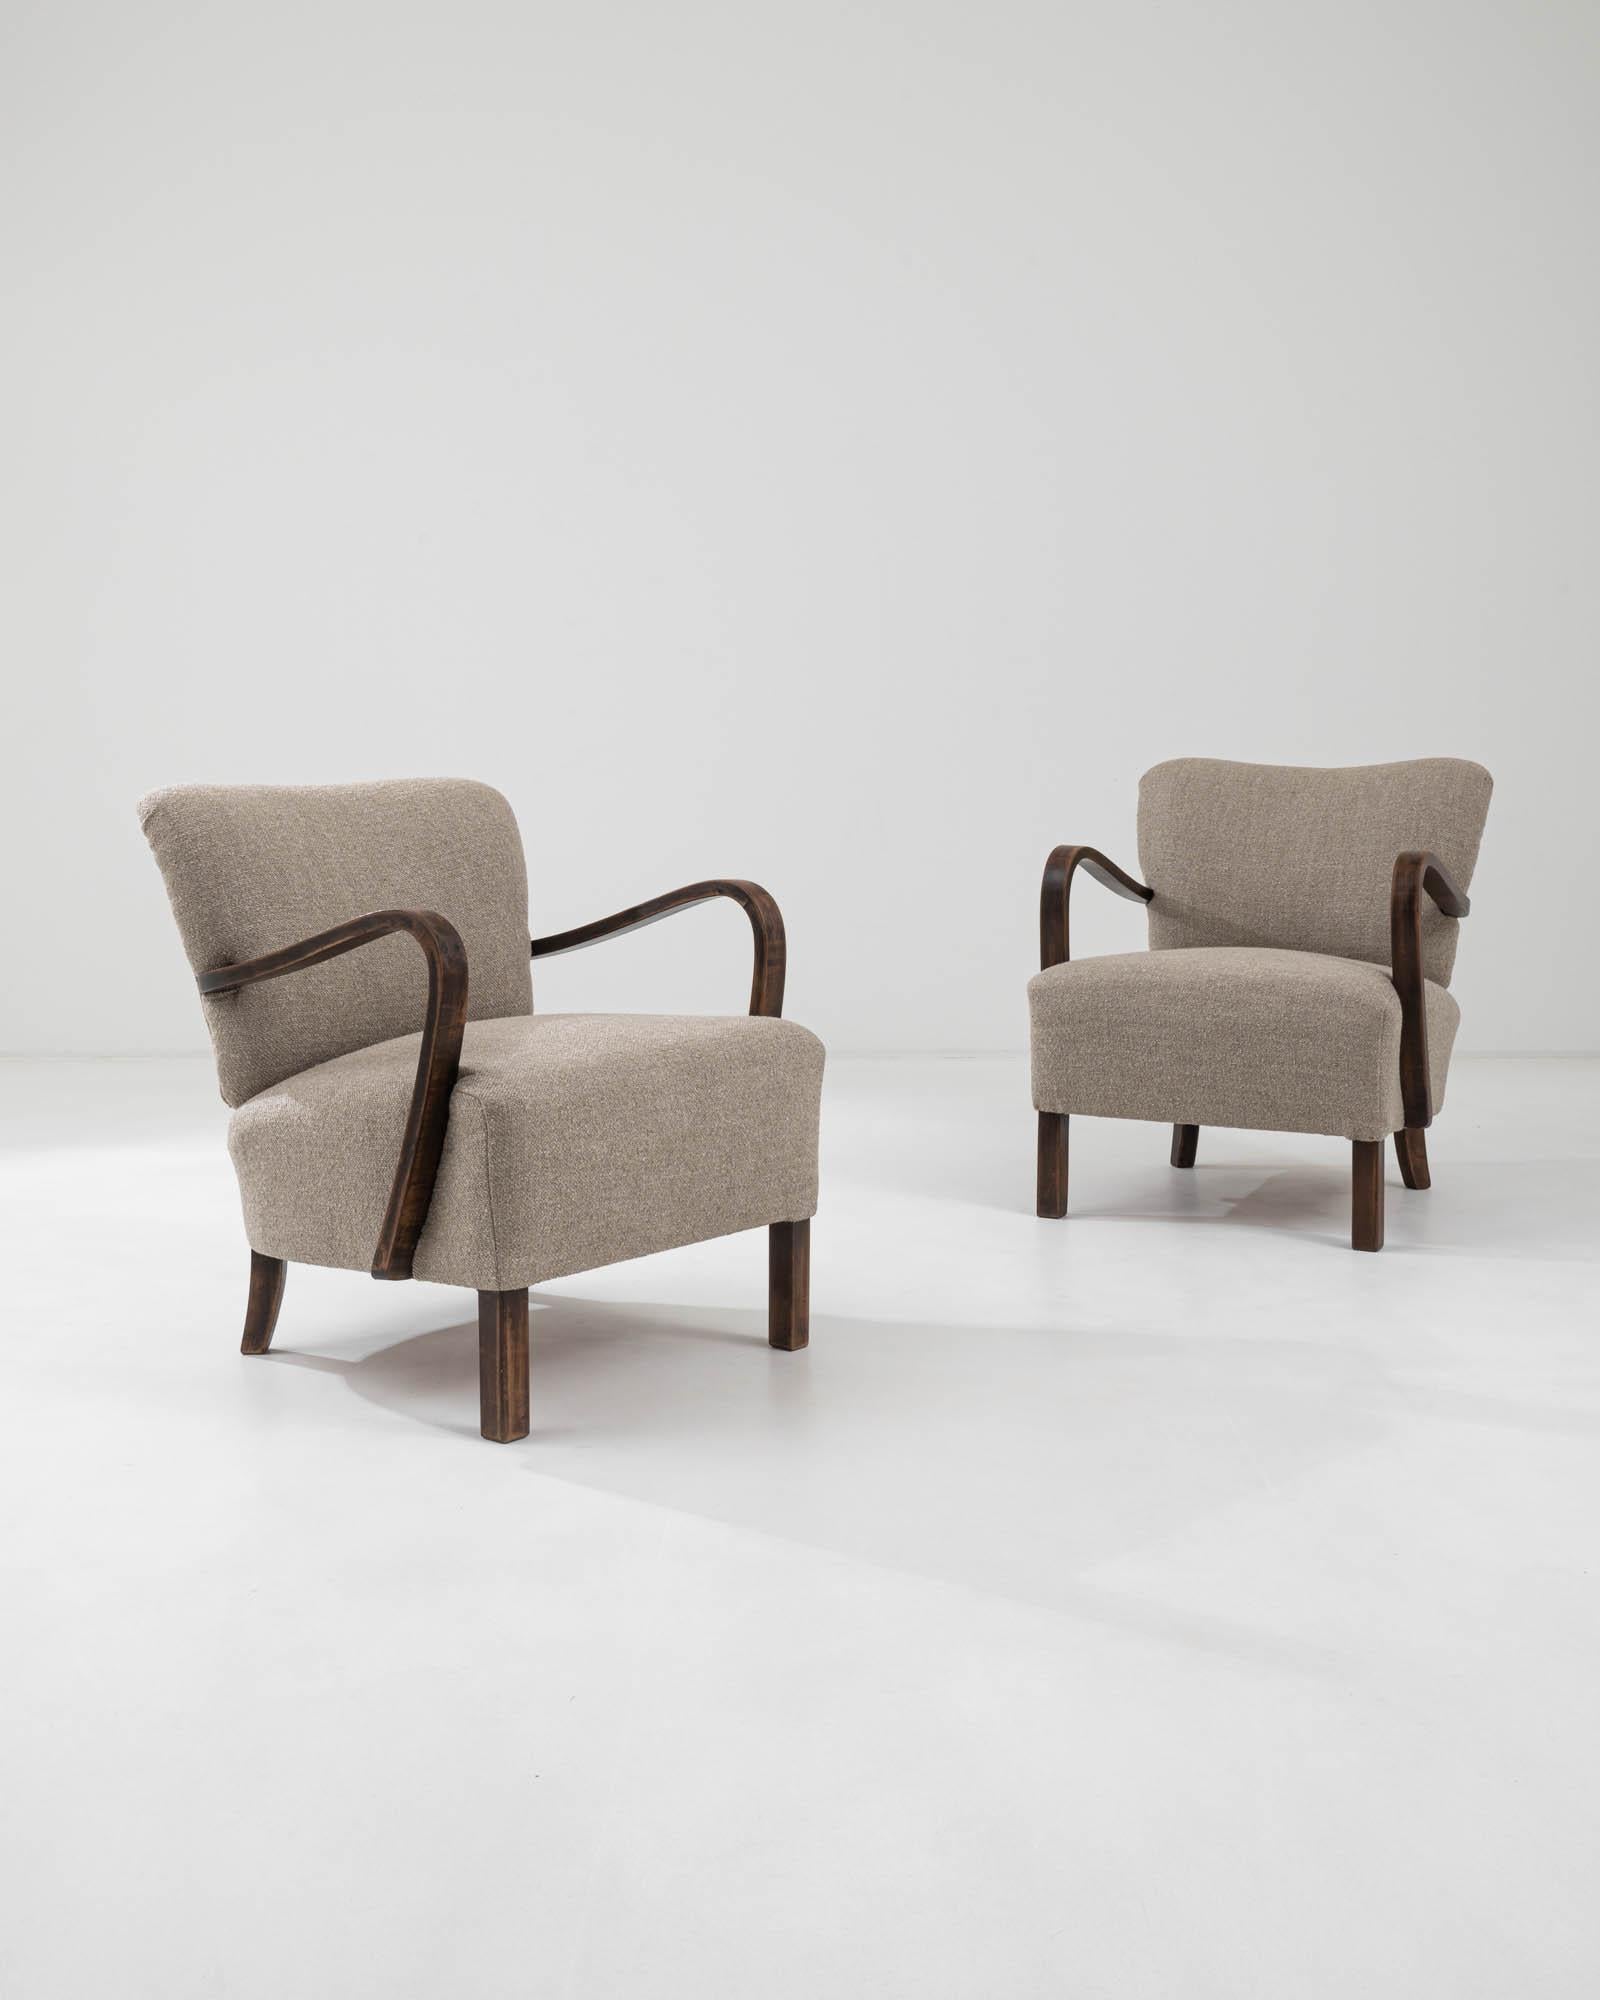 This iconic design by J. Halabala is instantly distinguished by its characteristic bentwood armrests and playful shape. Manufactured circa 1930, these lounge armchairs flaunt a modernist anatomy constituted by dynamic geometry; sturdy square feet